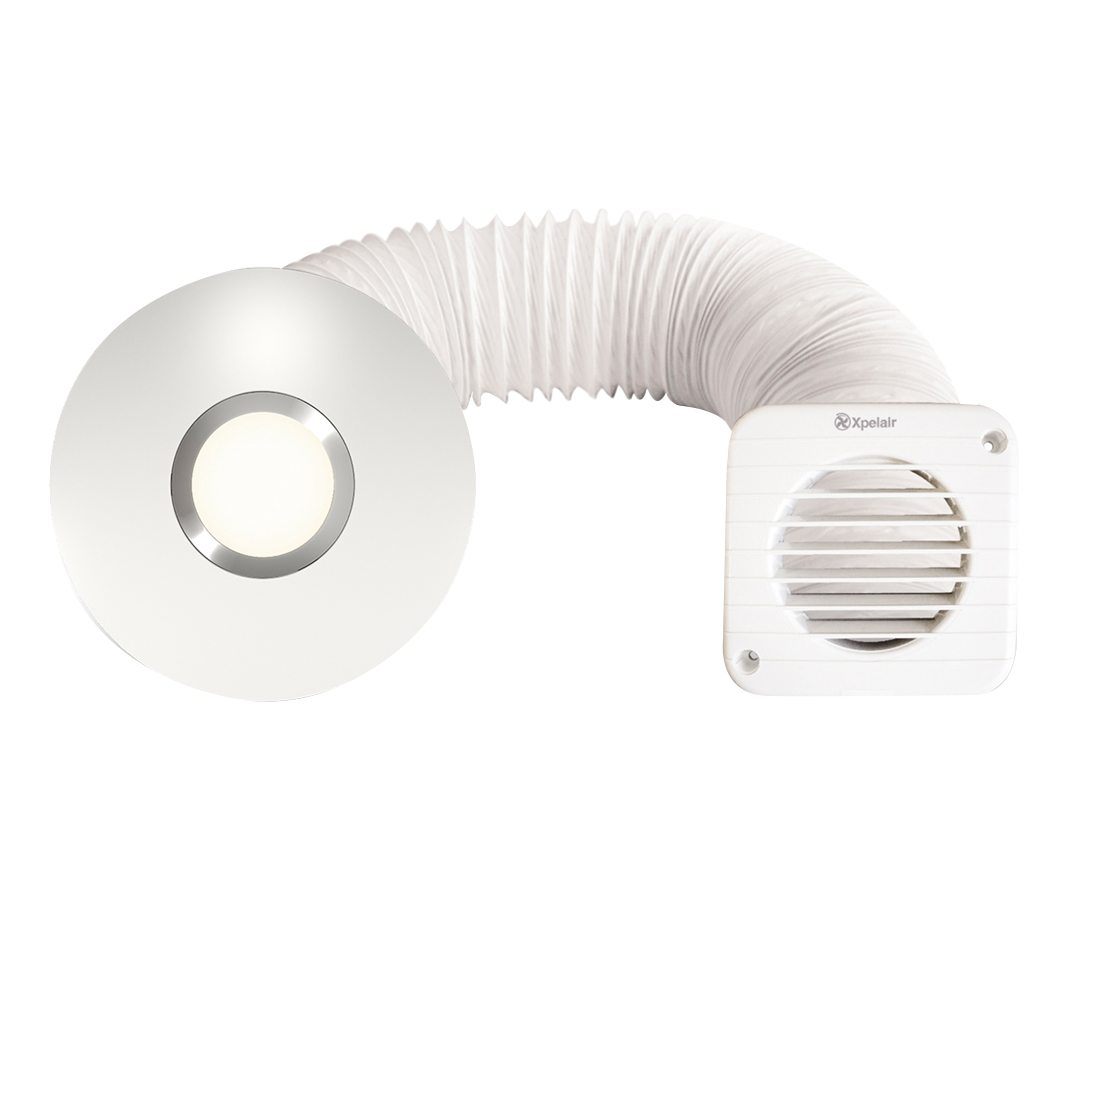 xpelair-simply-silent-shower-fan-with-light-model-bpcventilation 